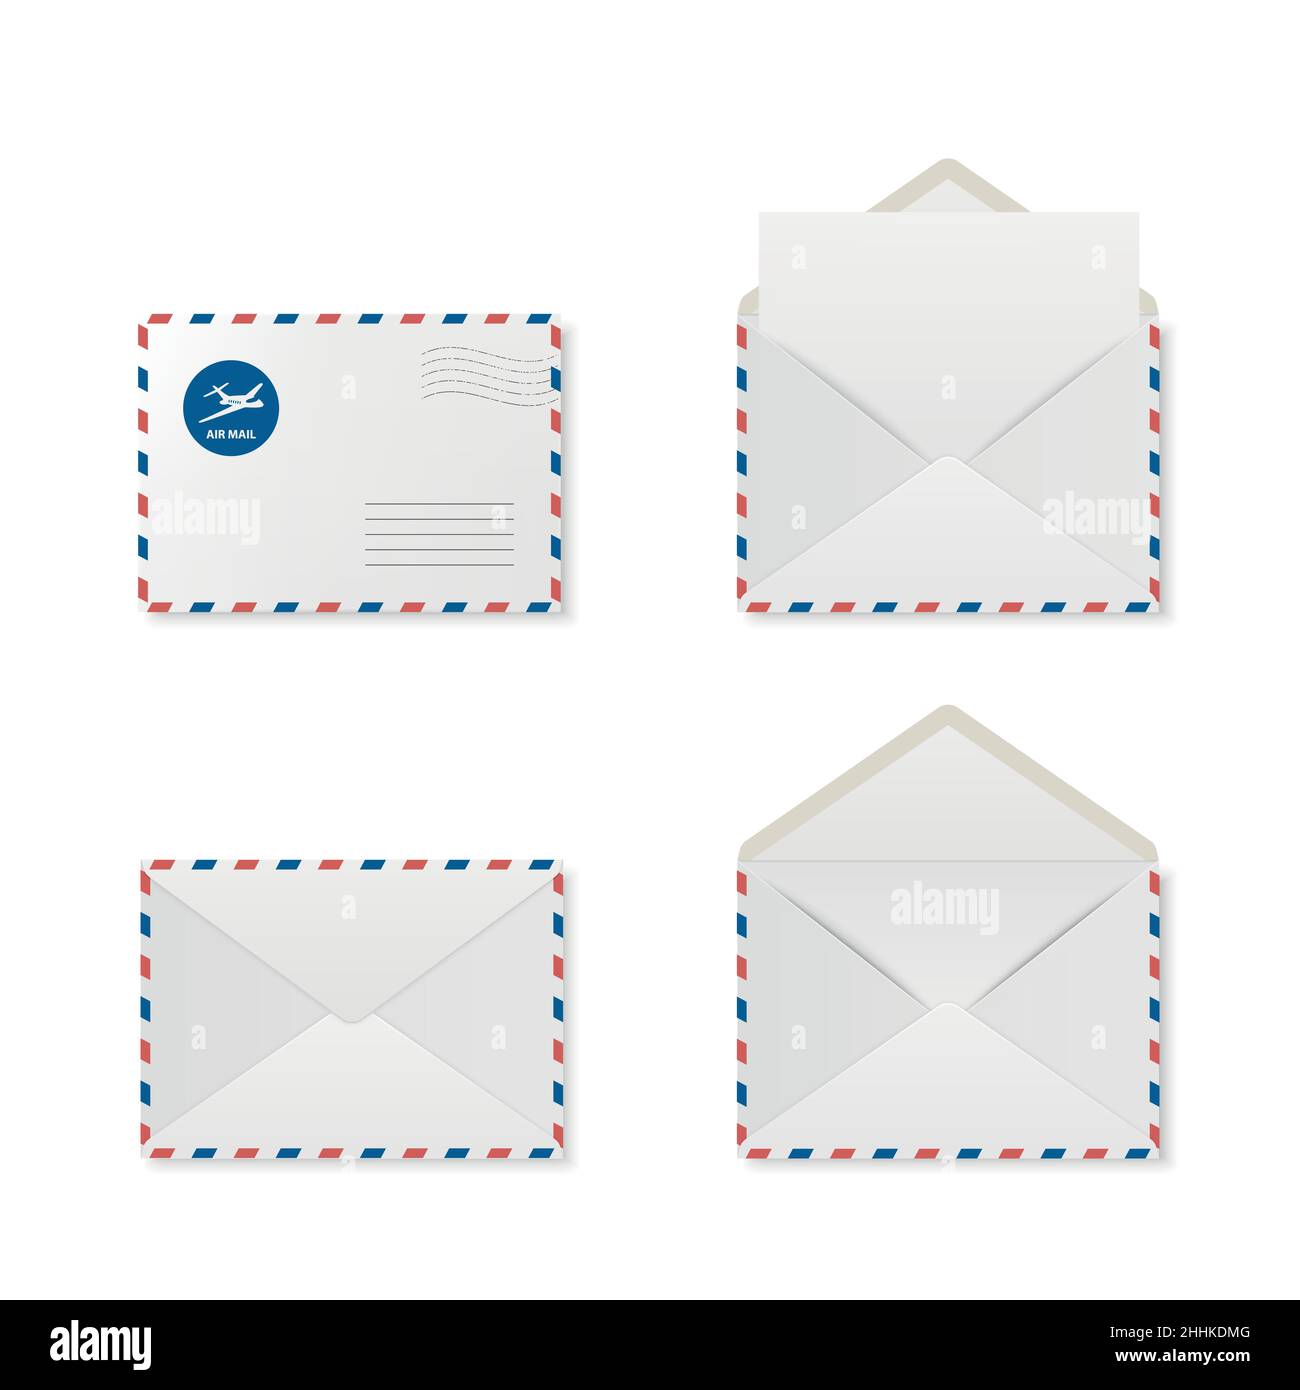 Vector 3d Realistic Open, Closed White Envelope Set. Isolated Envelopes. Blank, Empty Paper Sheet, Invitation, Message, Letter, Document. Design Stock Vector